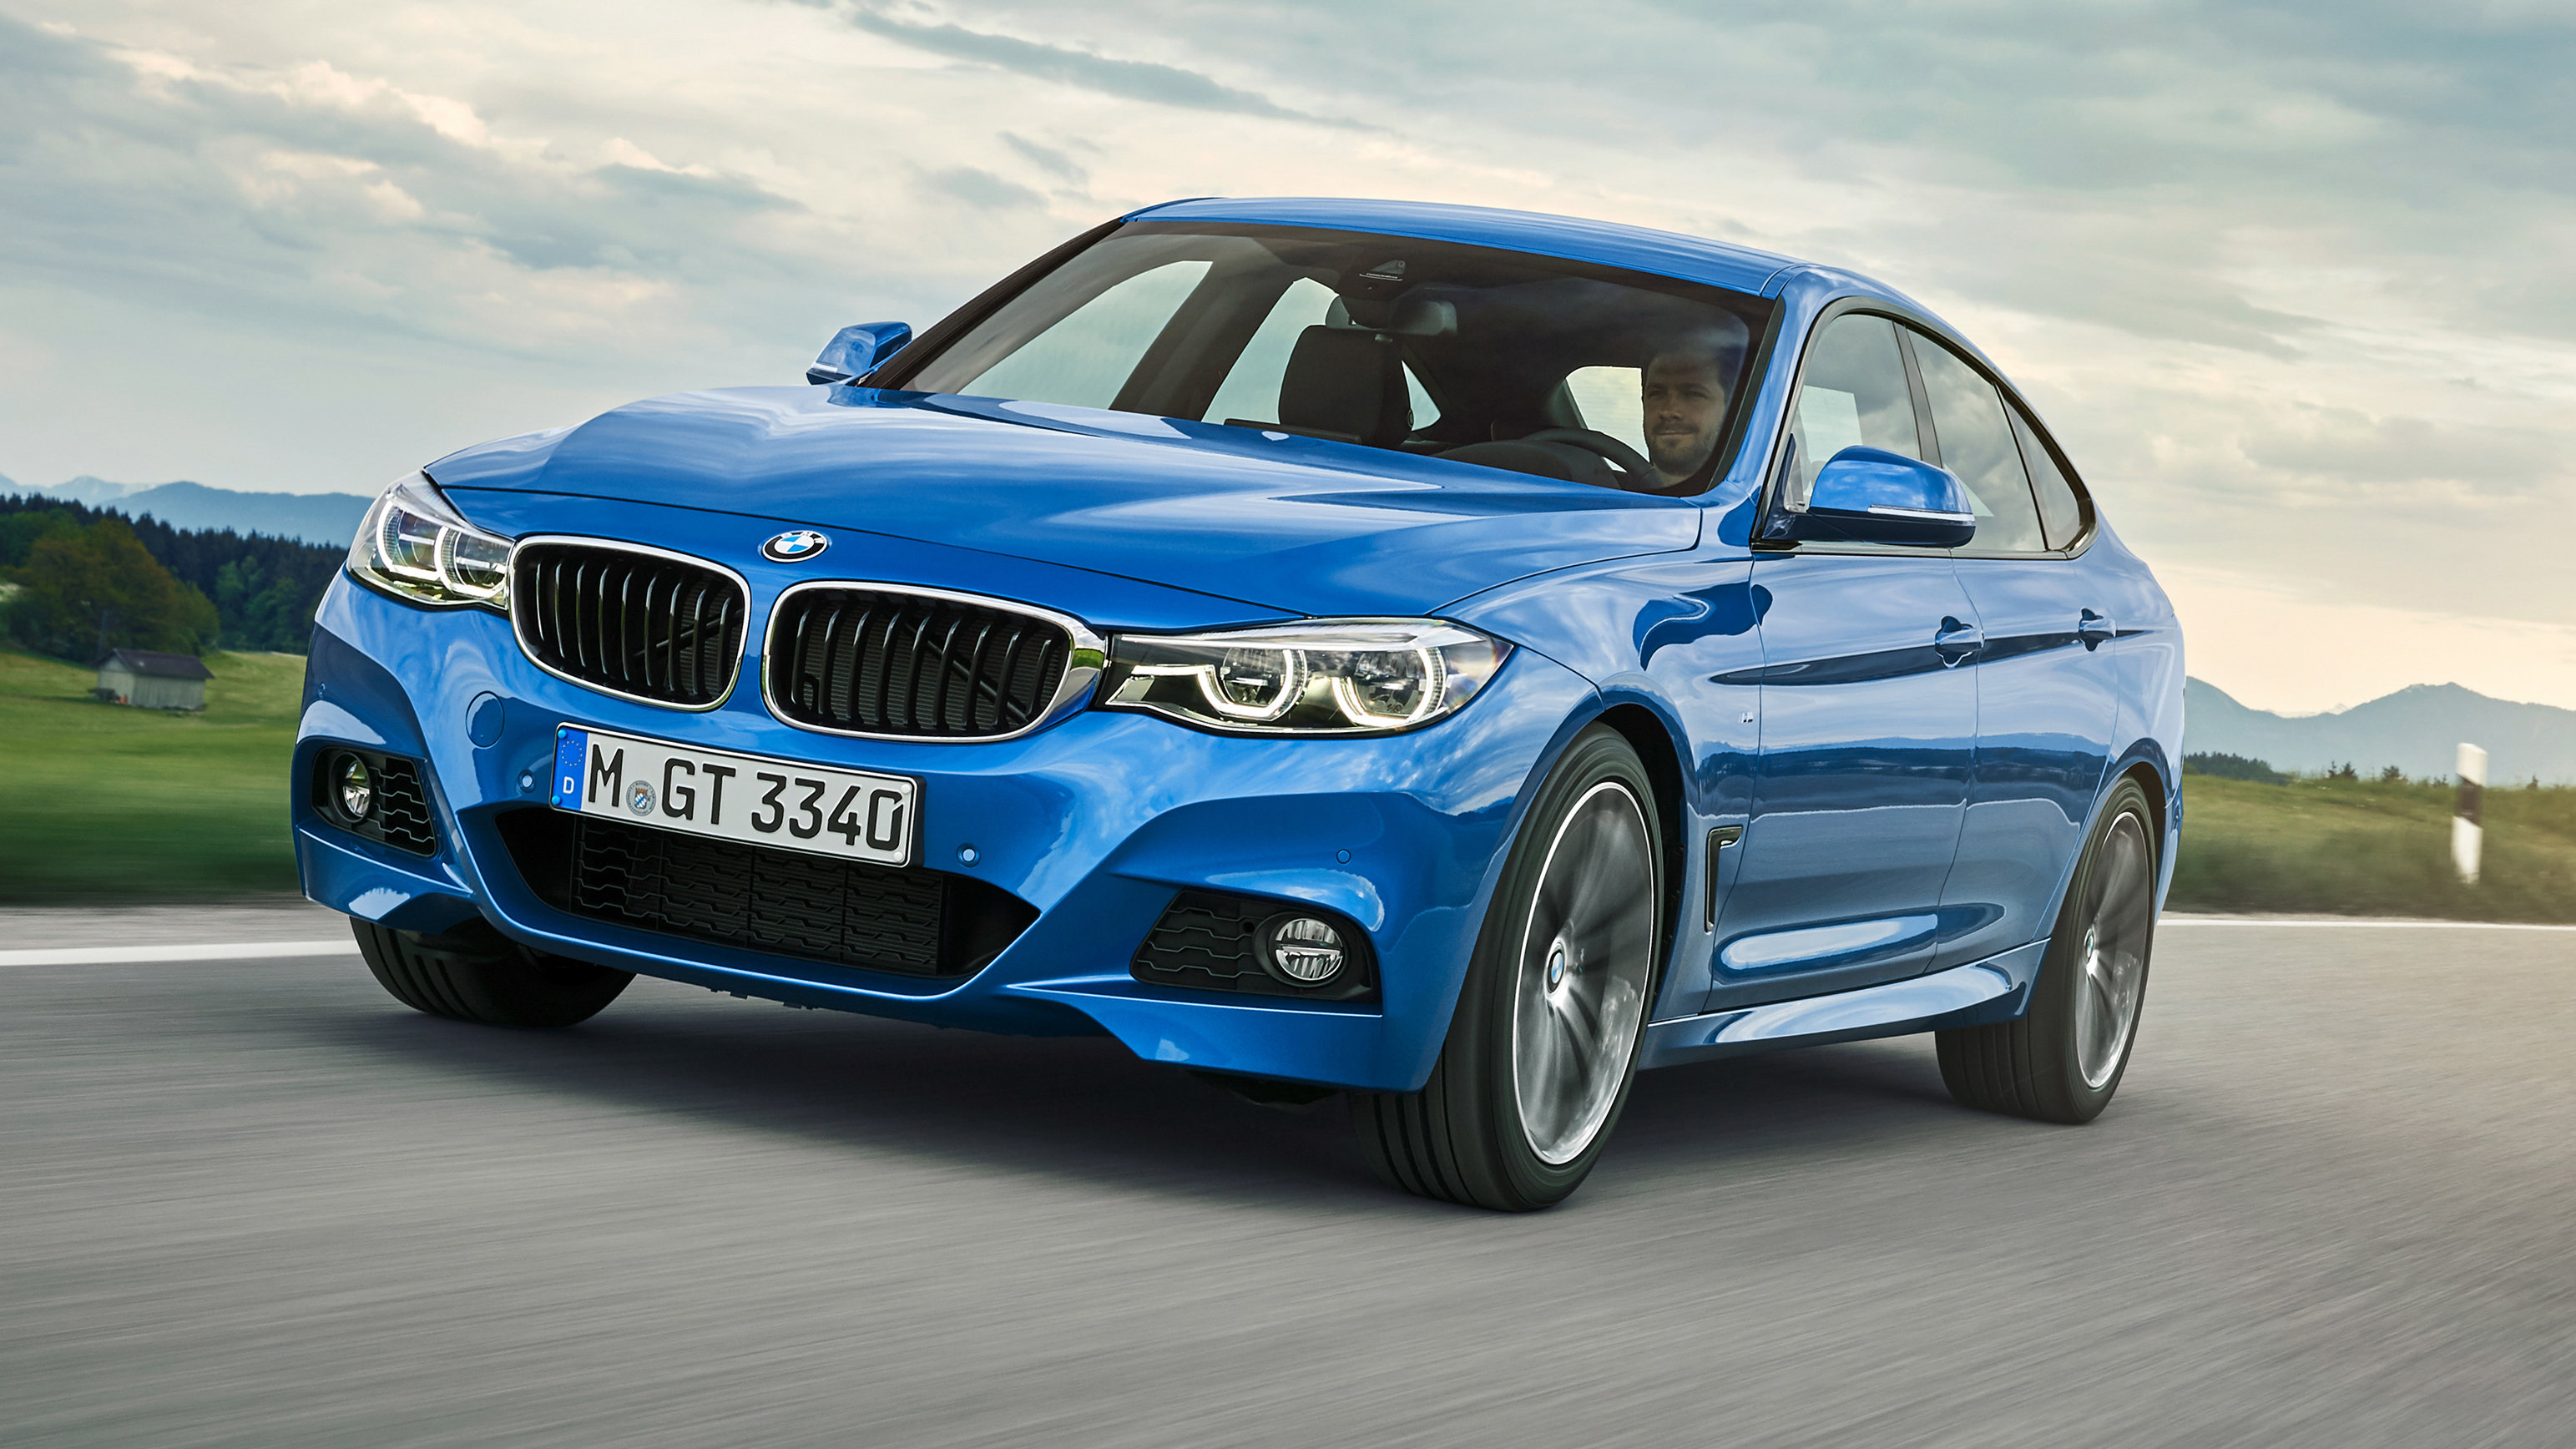 BMW has facelifted the 3-Series GT | Top Gear